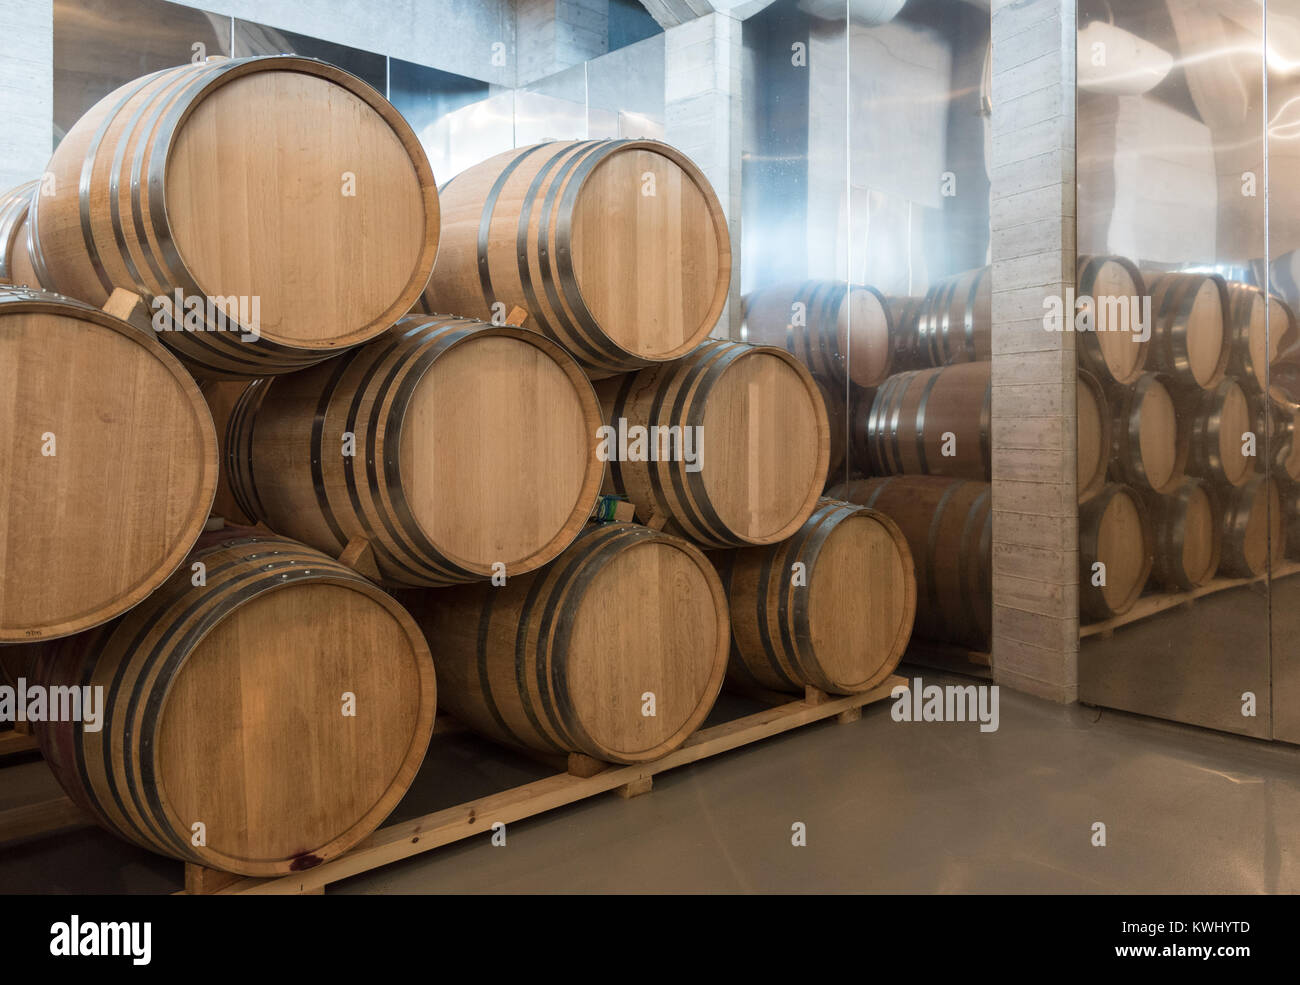 Wine wooden barrels stacked in the basement of the cellar of a winery Stock Photo